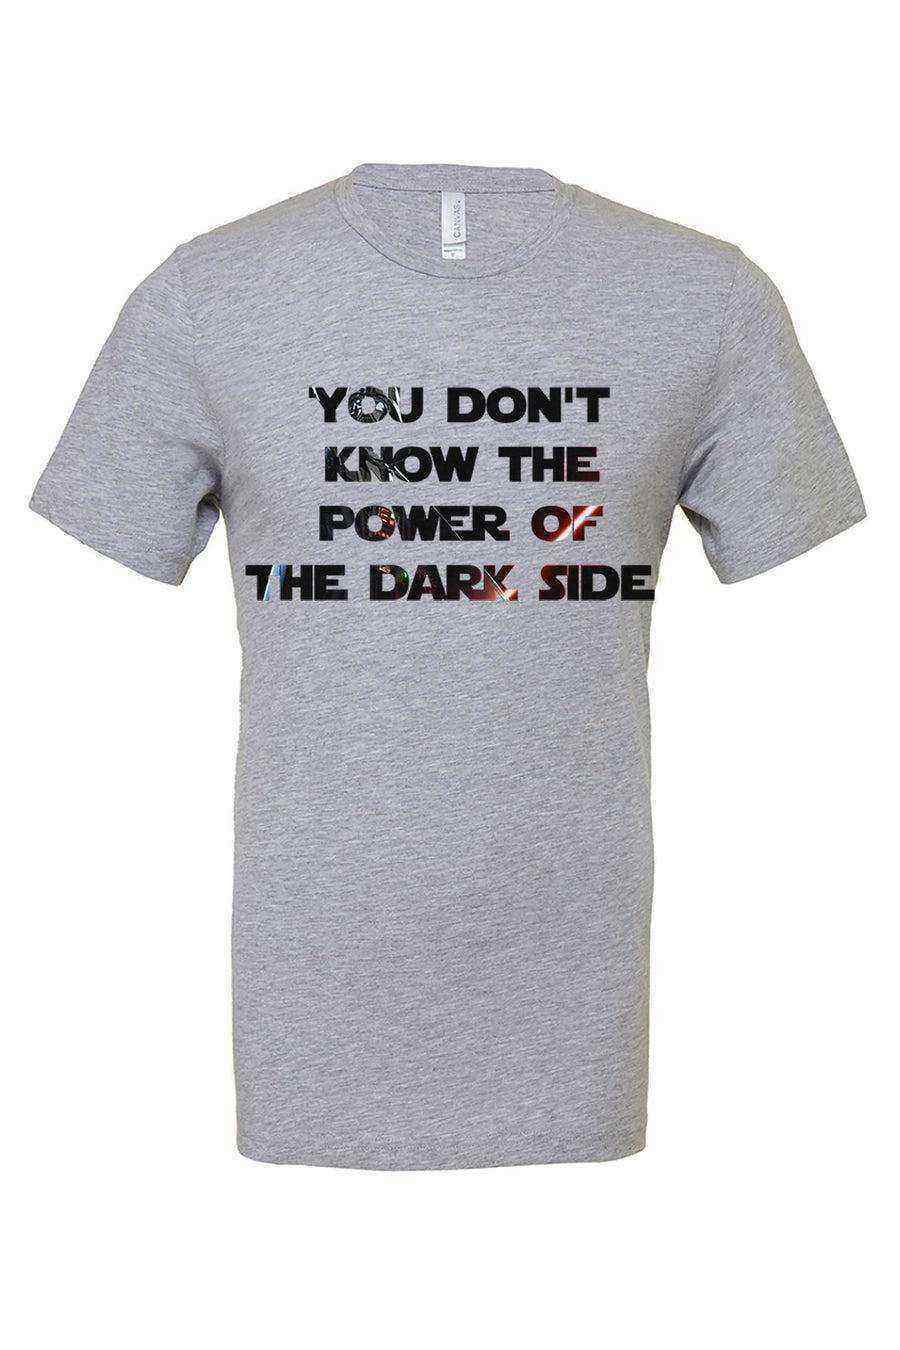 You Dont Know the Power of the Dark Side Tee - Dylan's Tees